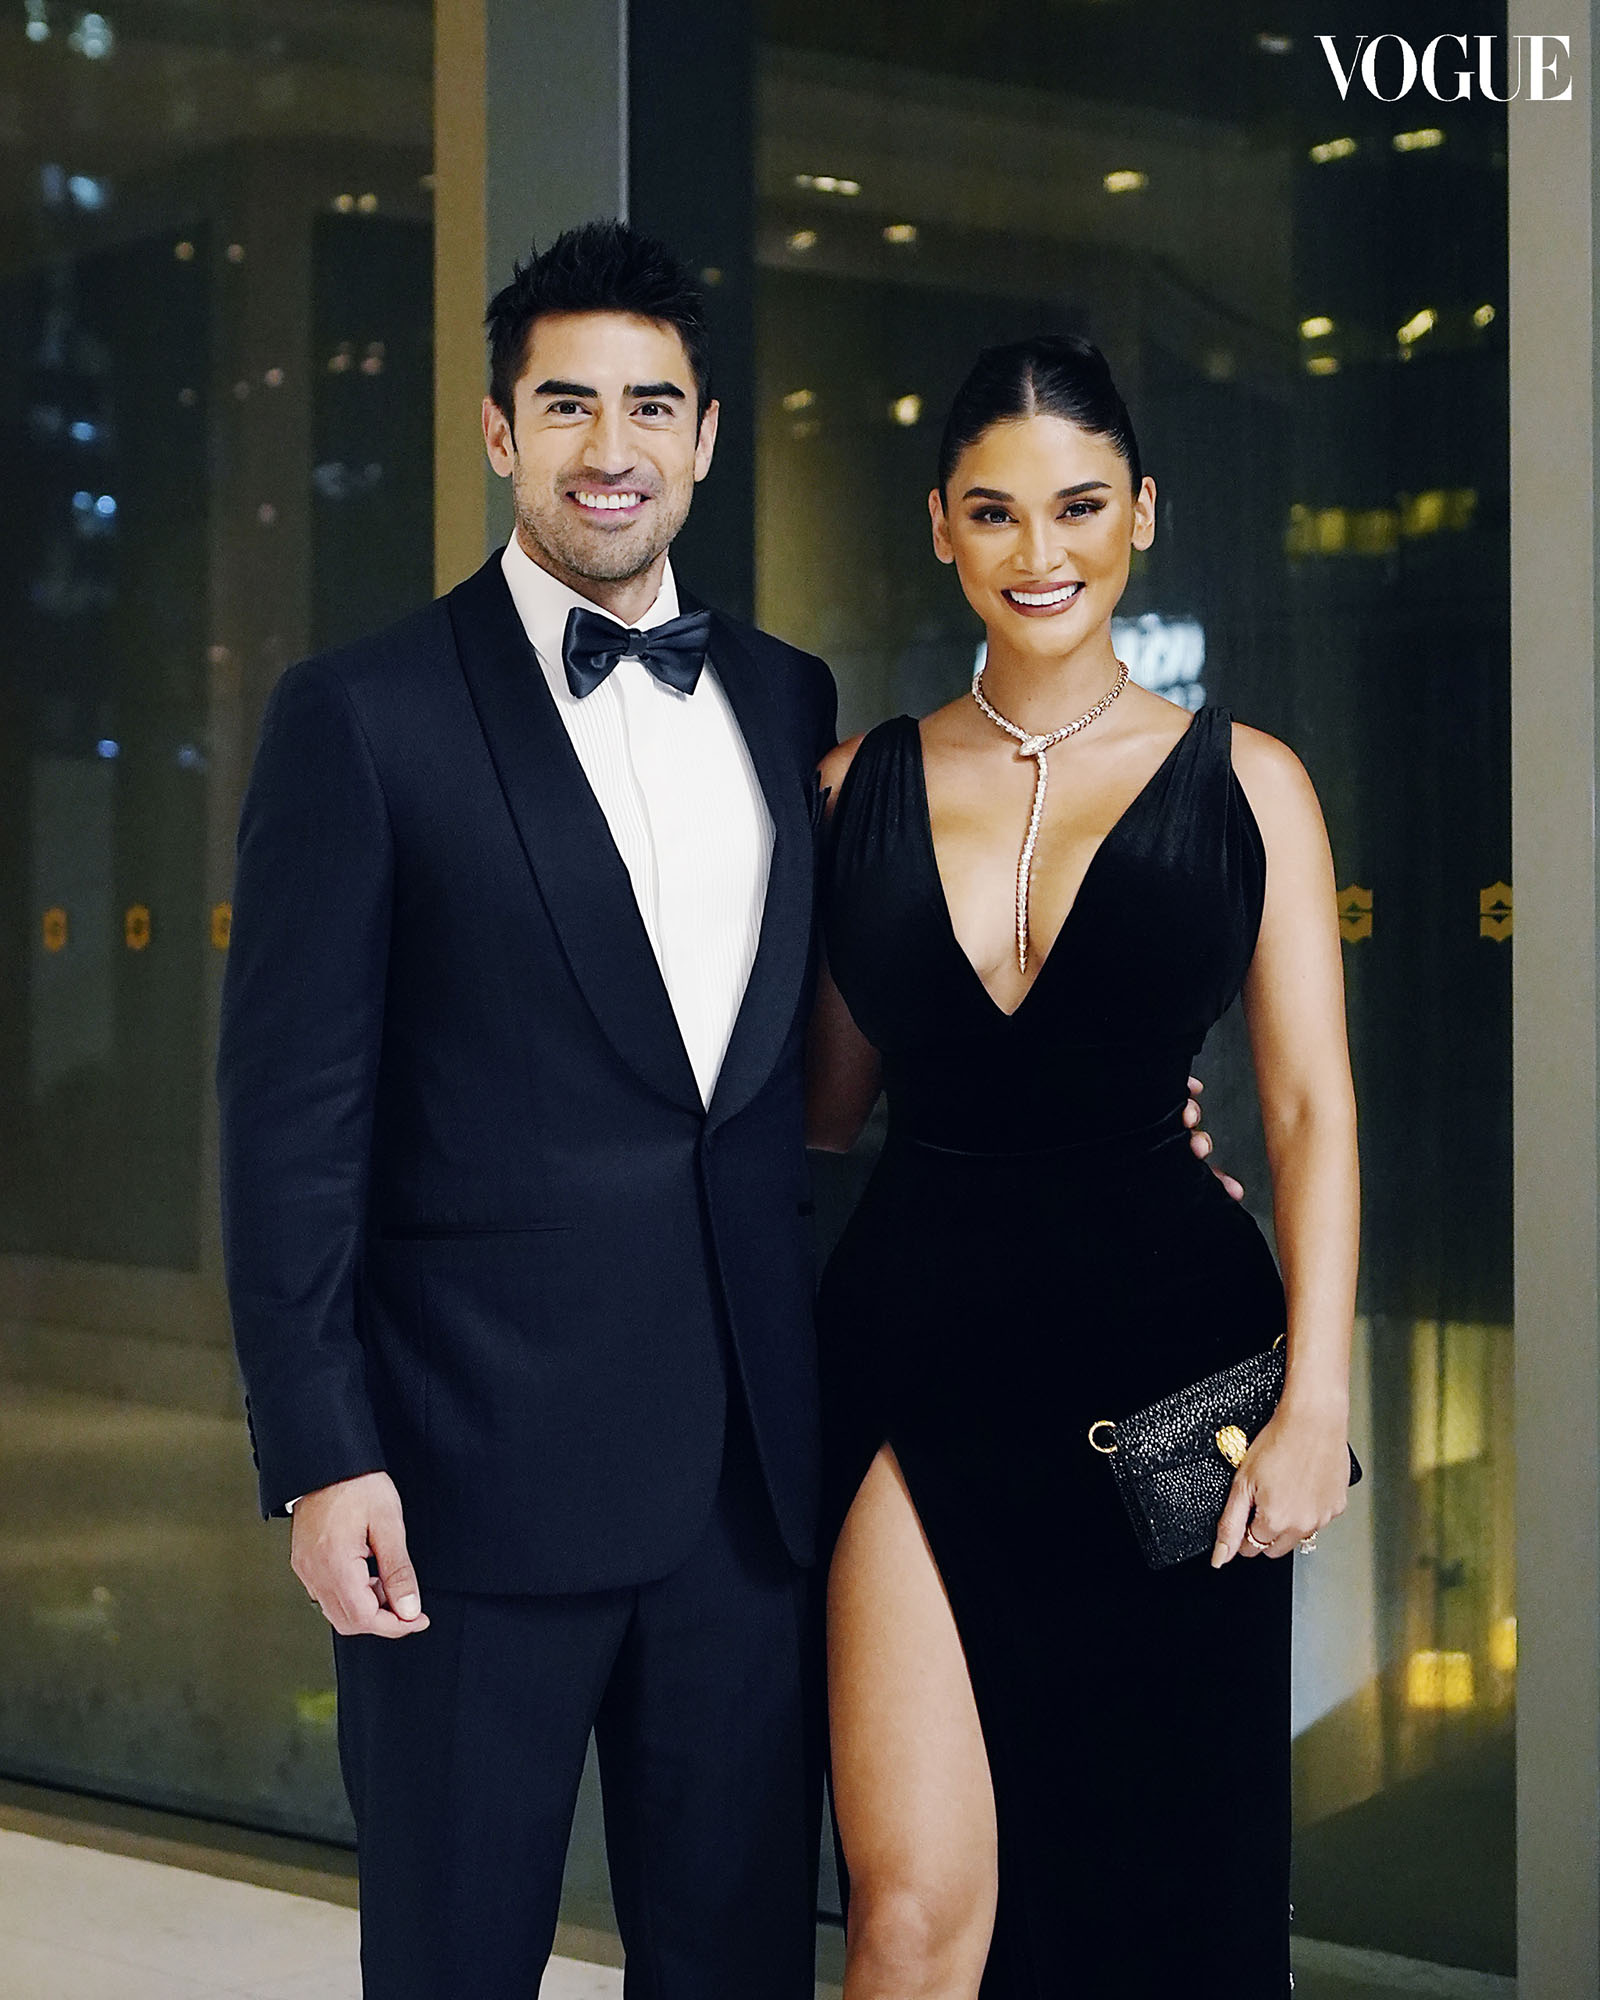 Dinner Guests At The Vogue Philippines Anniversary Gala